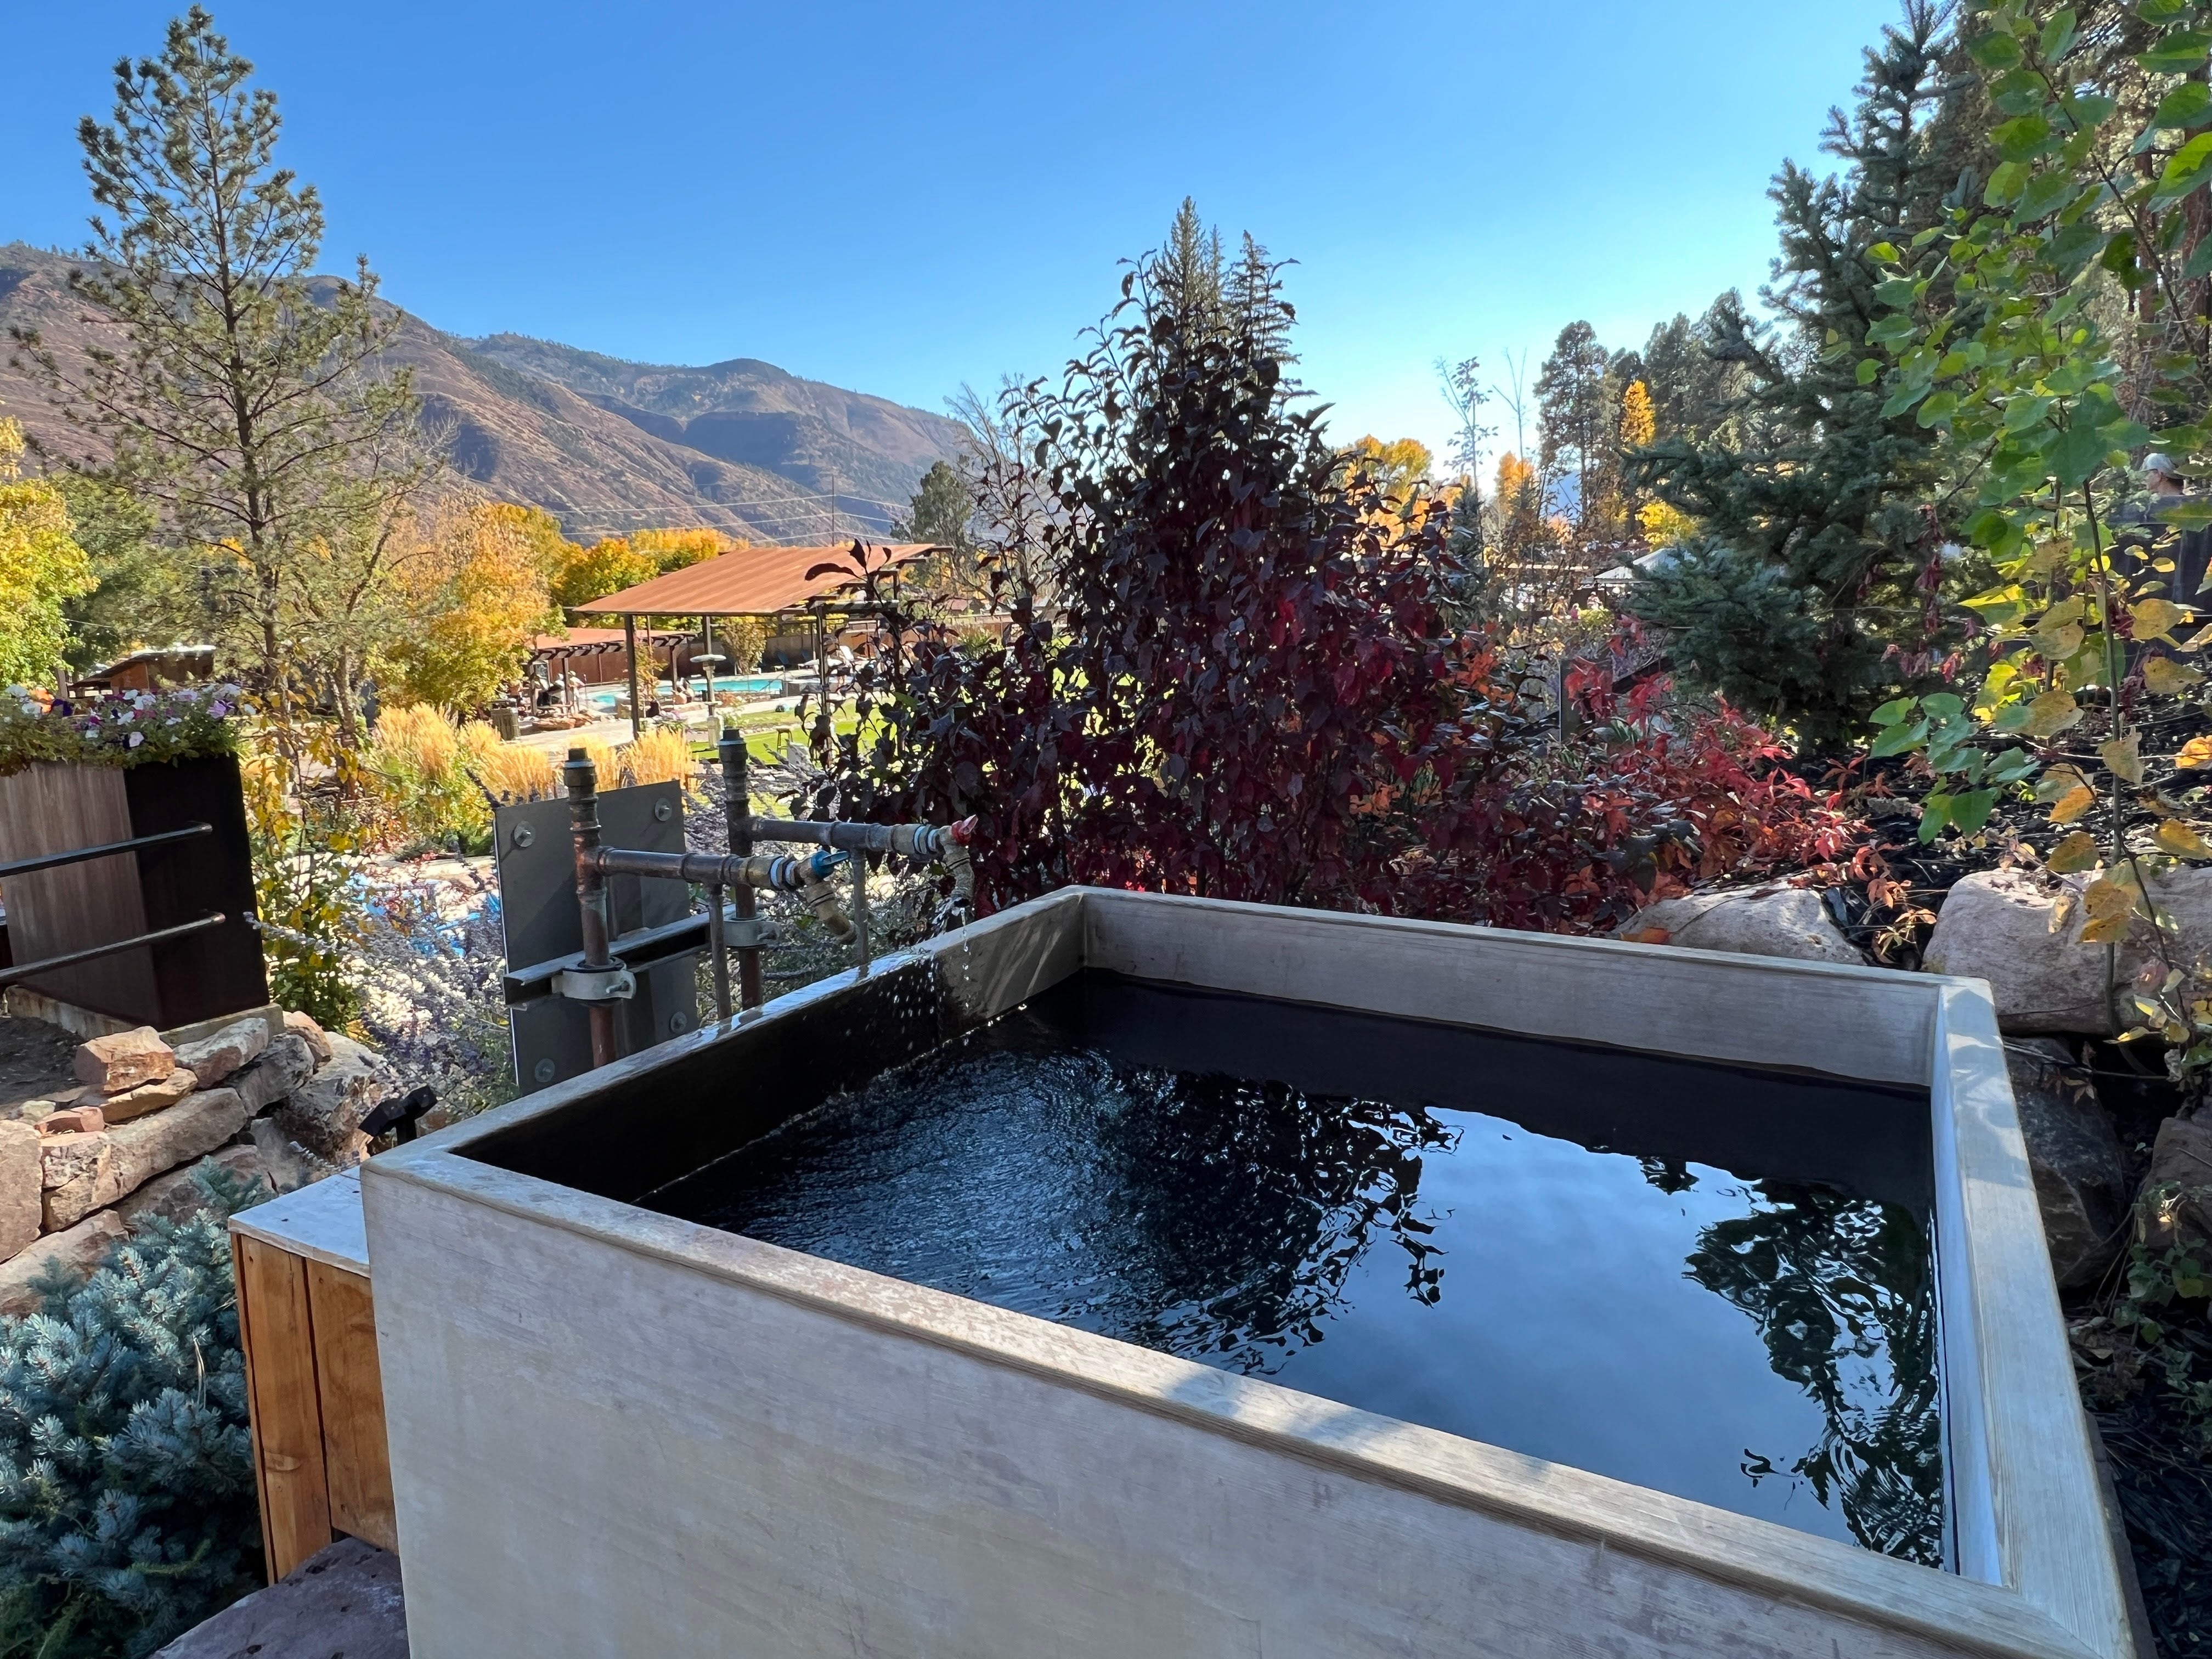 8 Relaxing Hot Spring Getaways to Book Right Now - 5280